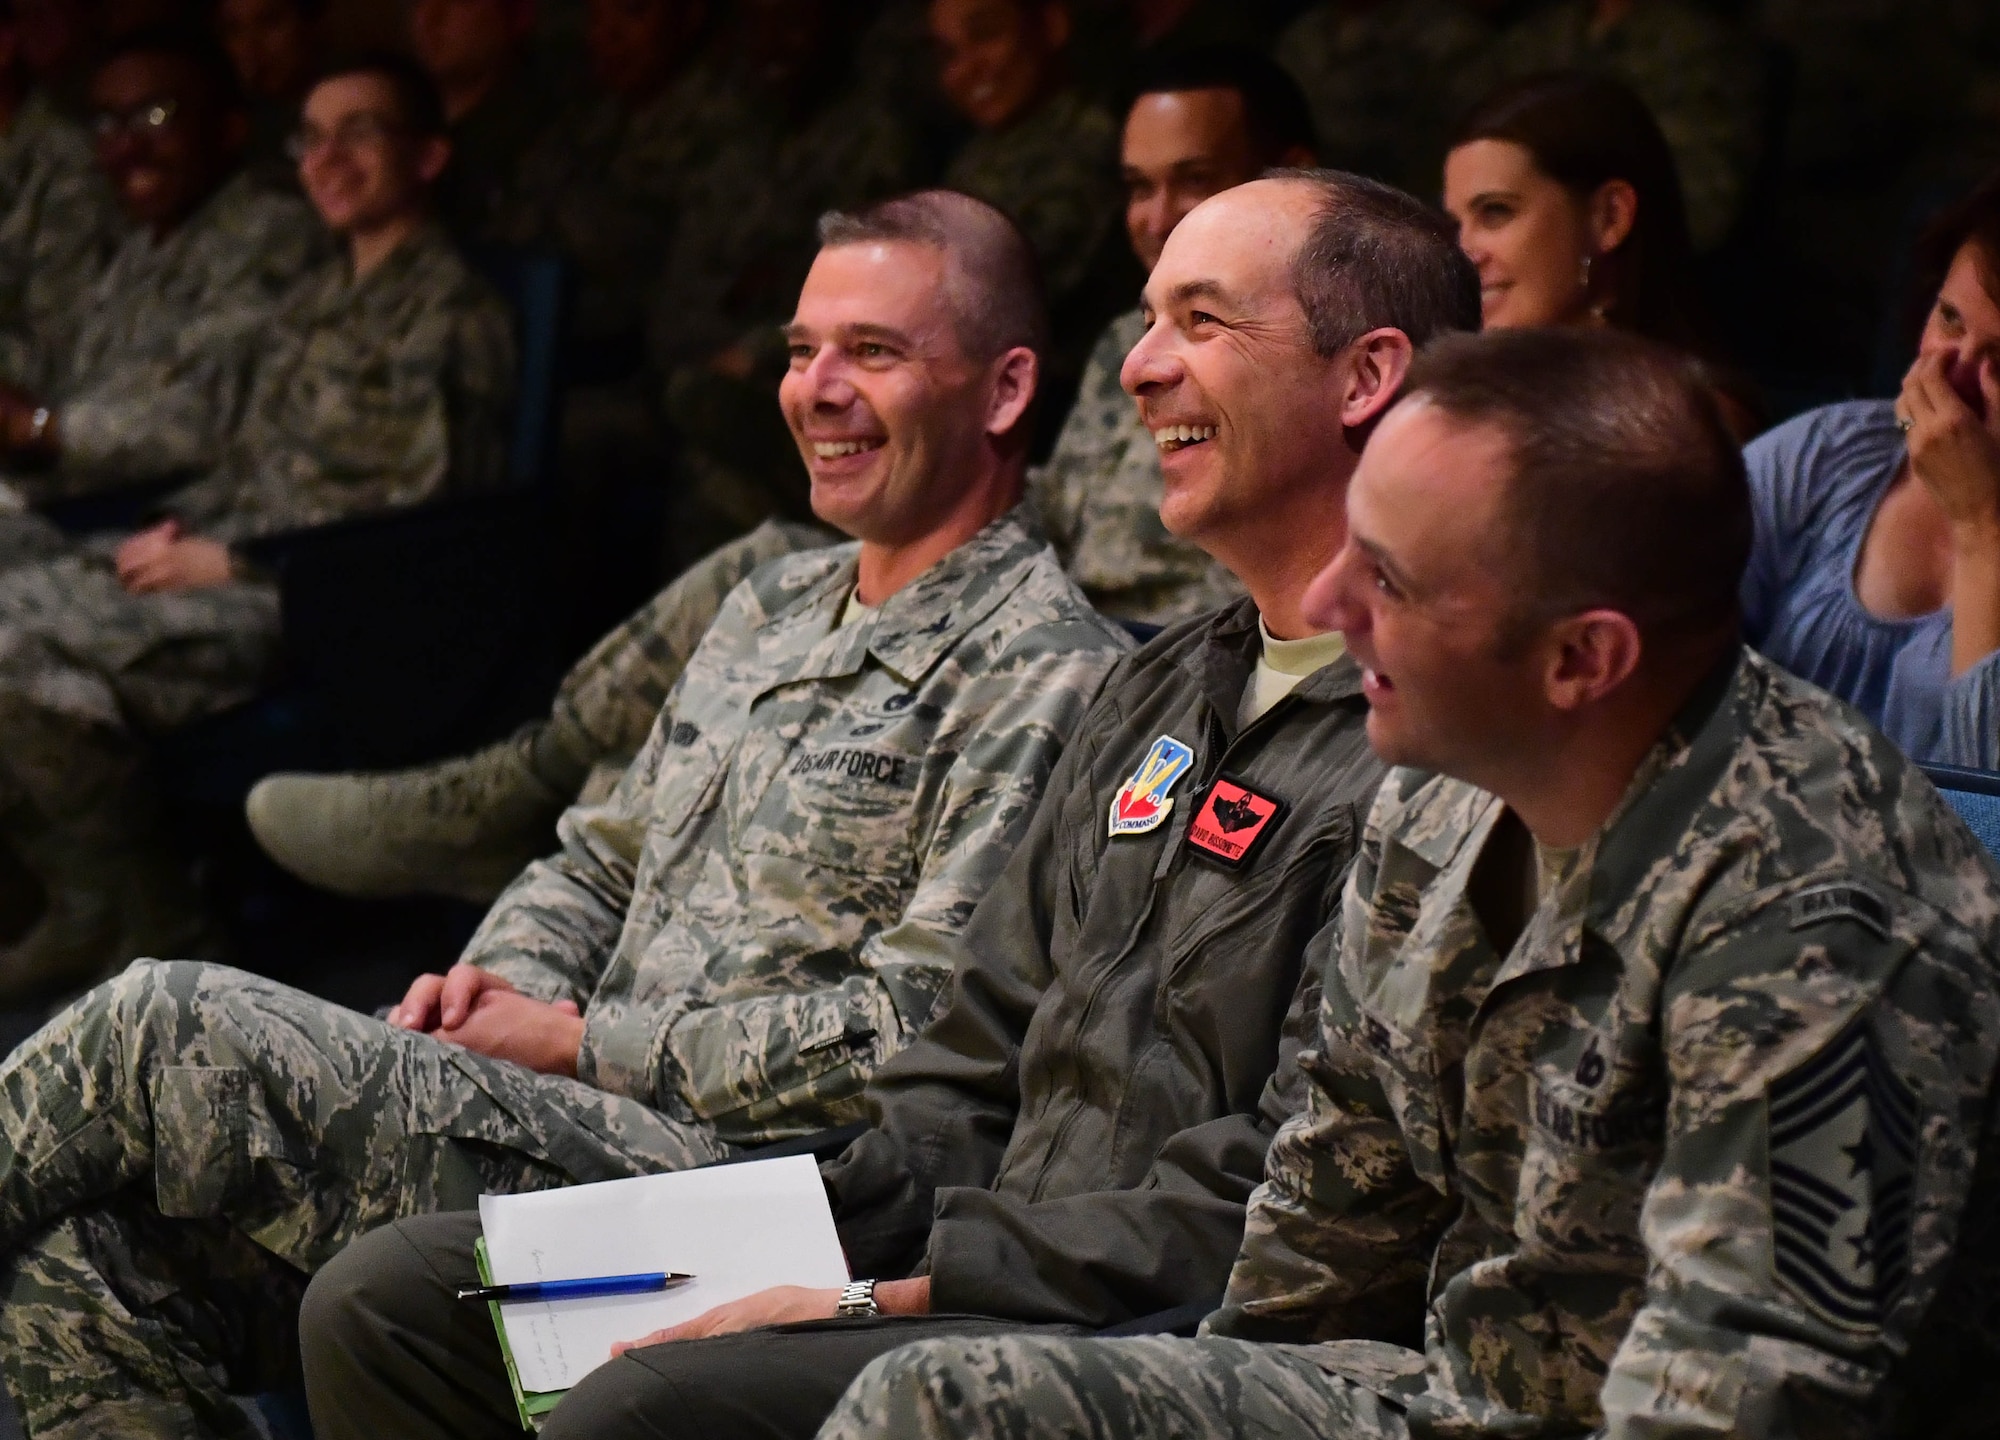 Nellis and Creech Air Force Base, Nev., leadership laugh as Tech. Sgt. Jimmy, 78th Attack Squadron intelligence analyst, shares his personal experiences during the first Storytellers event May 10, 2017, at Creech Air Force Base, Nev. Storytellers helps Airmen connect with others allowing them to relate to one another through stories of overcoming adversity. (U.S. Air Force photo/Senior Airman Christian Clausen)